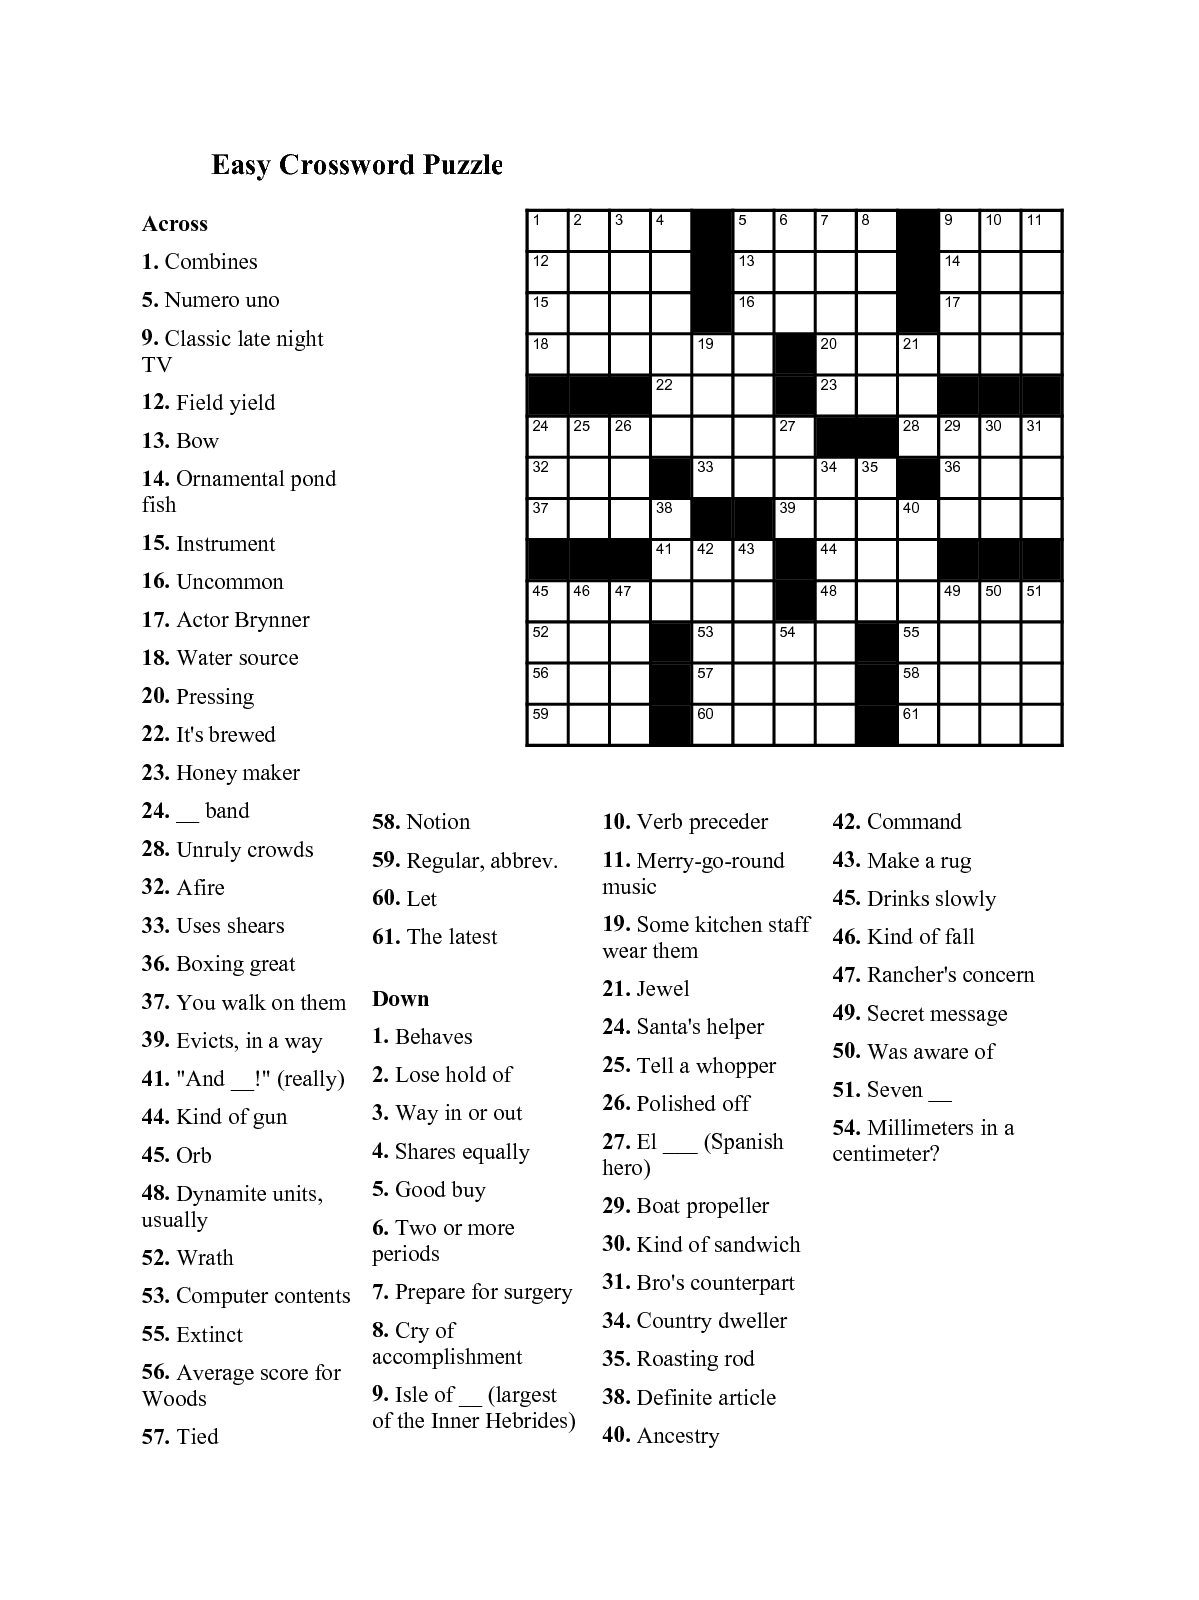 A Literary Crossword Puzzle from Thriller Author ...